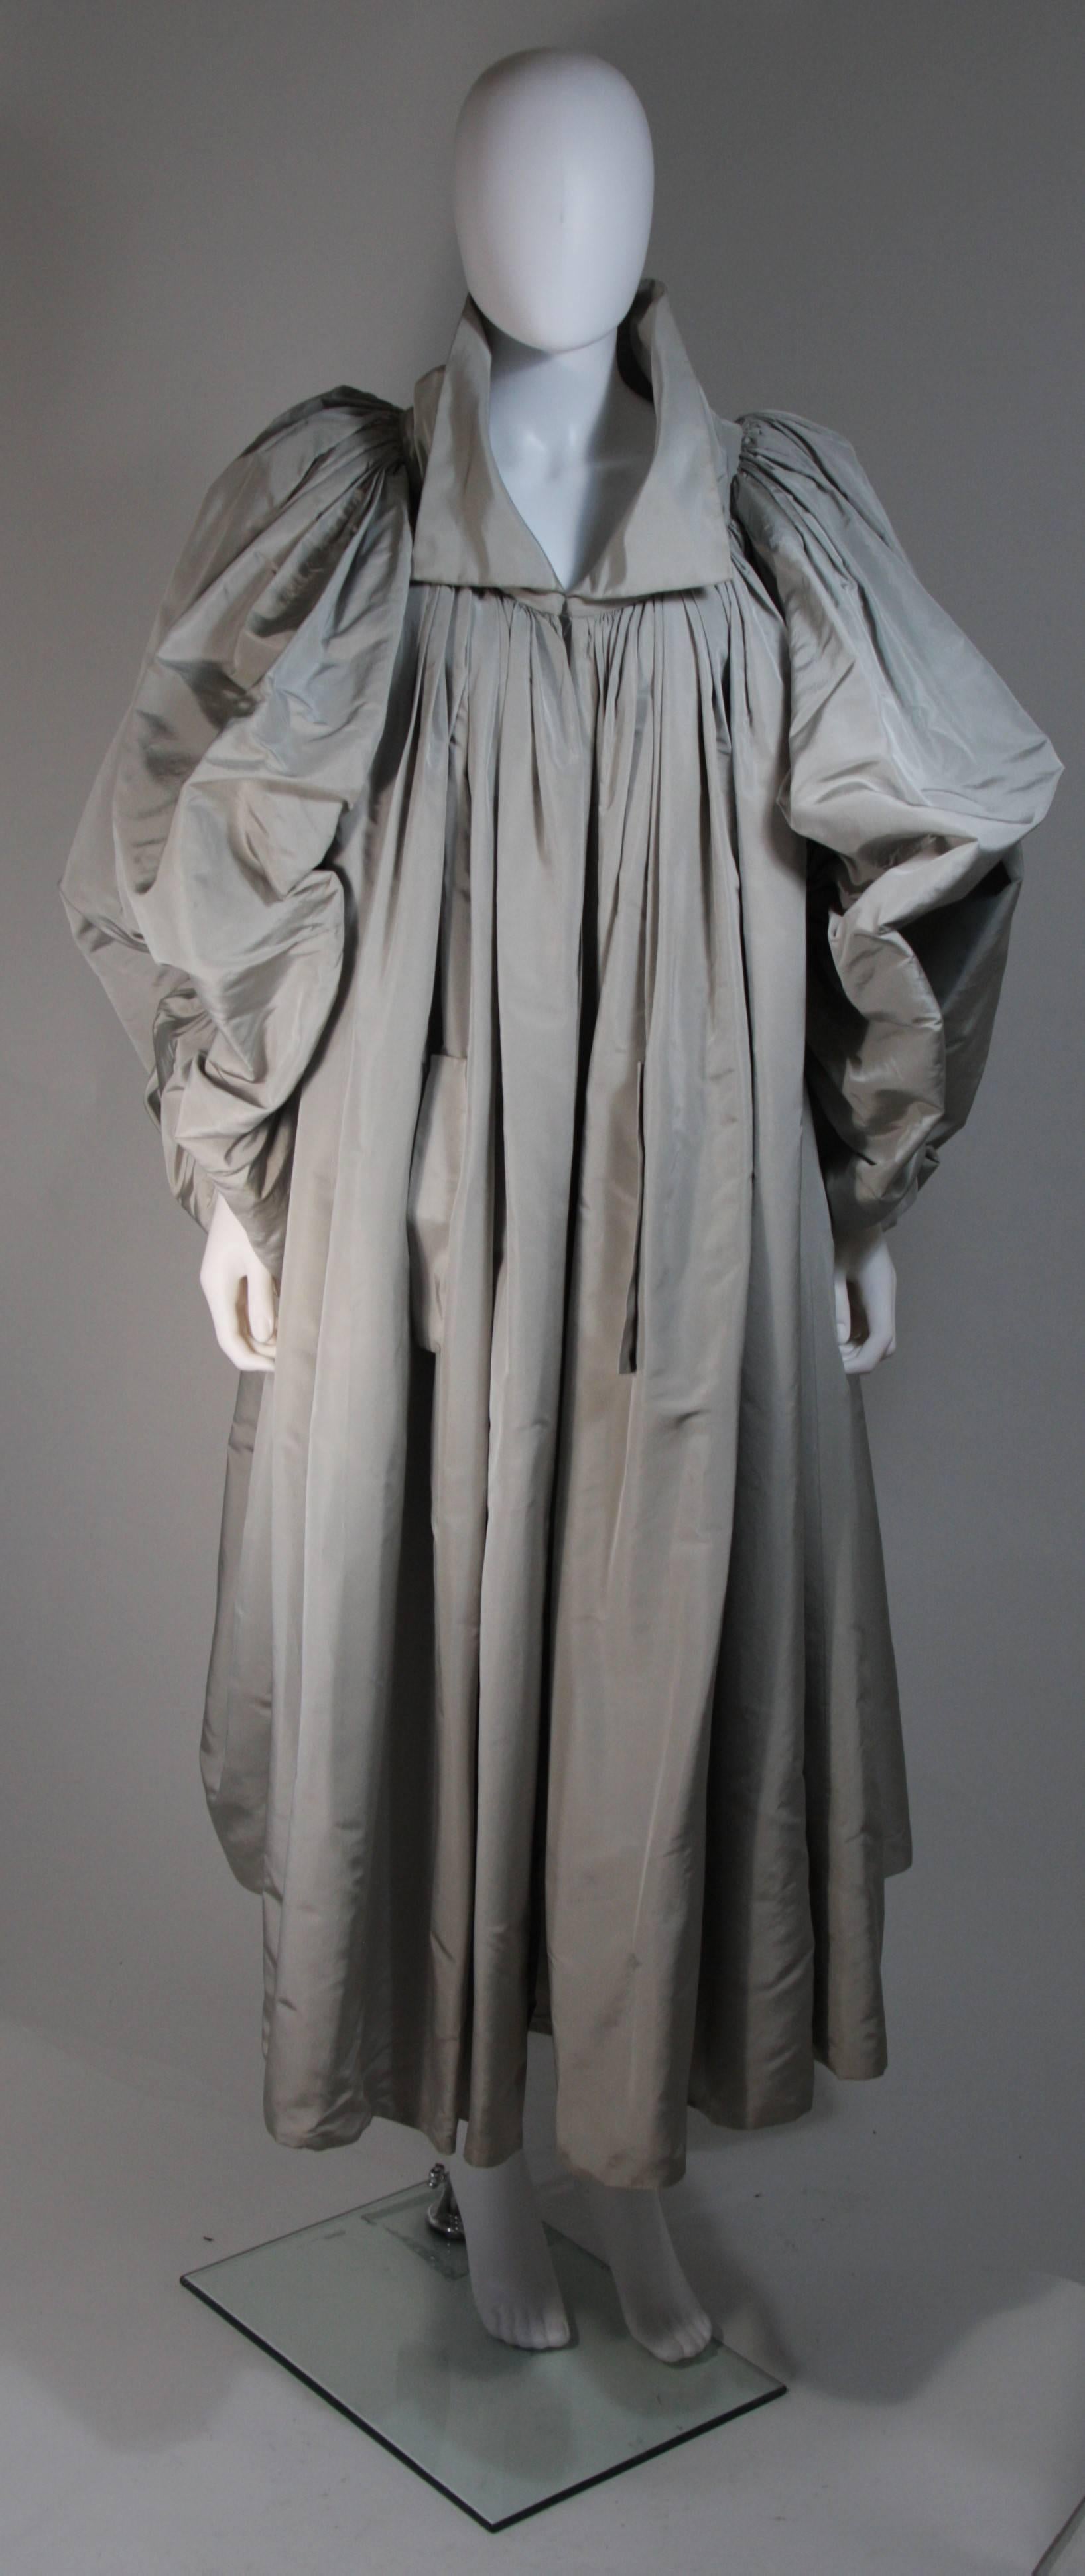 This Galanos design is composed of a grey silk. The dramatic design features a hook and eye closure at the collar end. There is gathering at the neckline and rounded puff style sleeves. This coat is sold in 